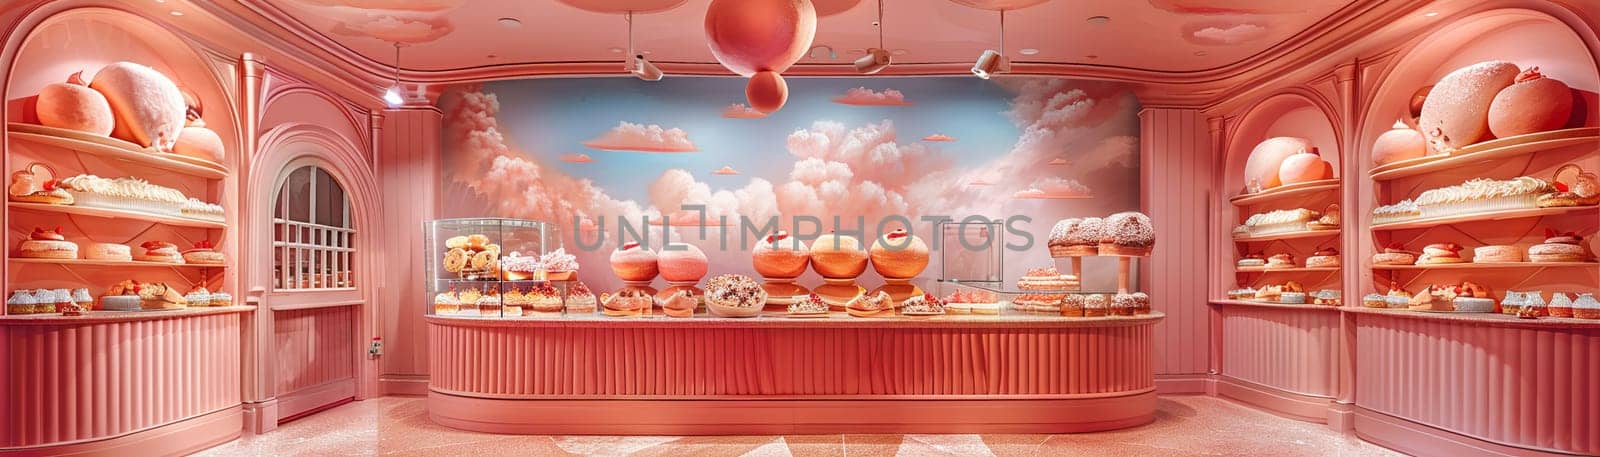 Whimsical cake shop with pastries that seem alive, painted in a bright and inviting storybook style.